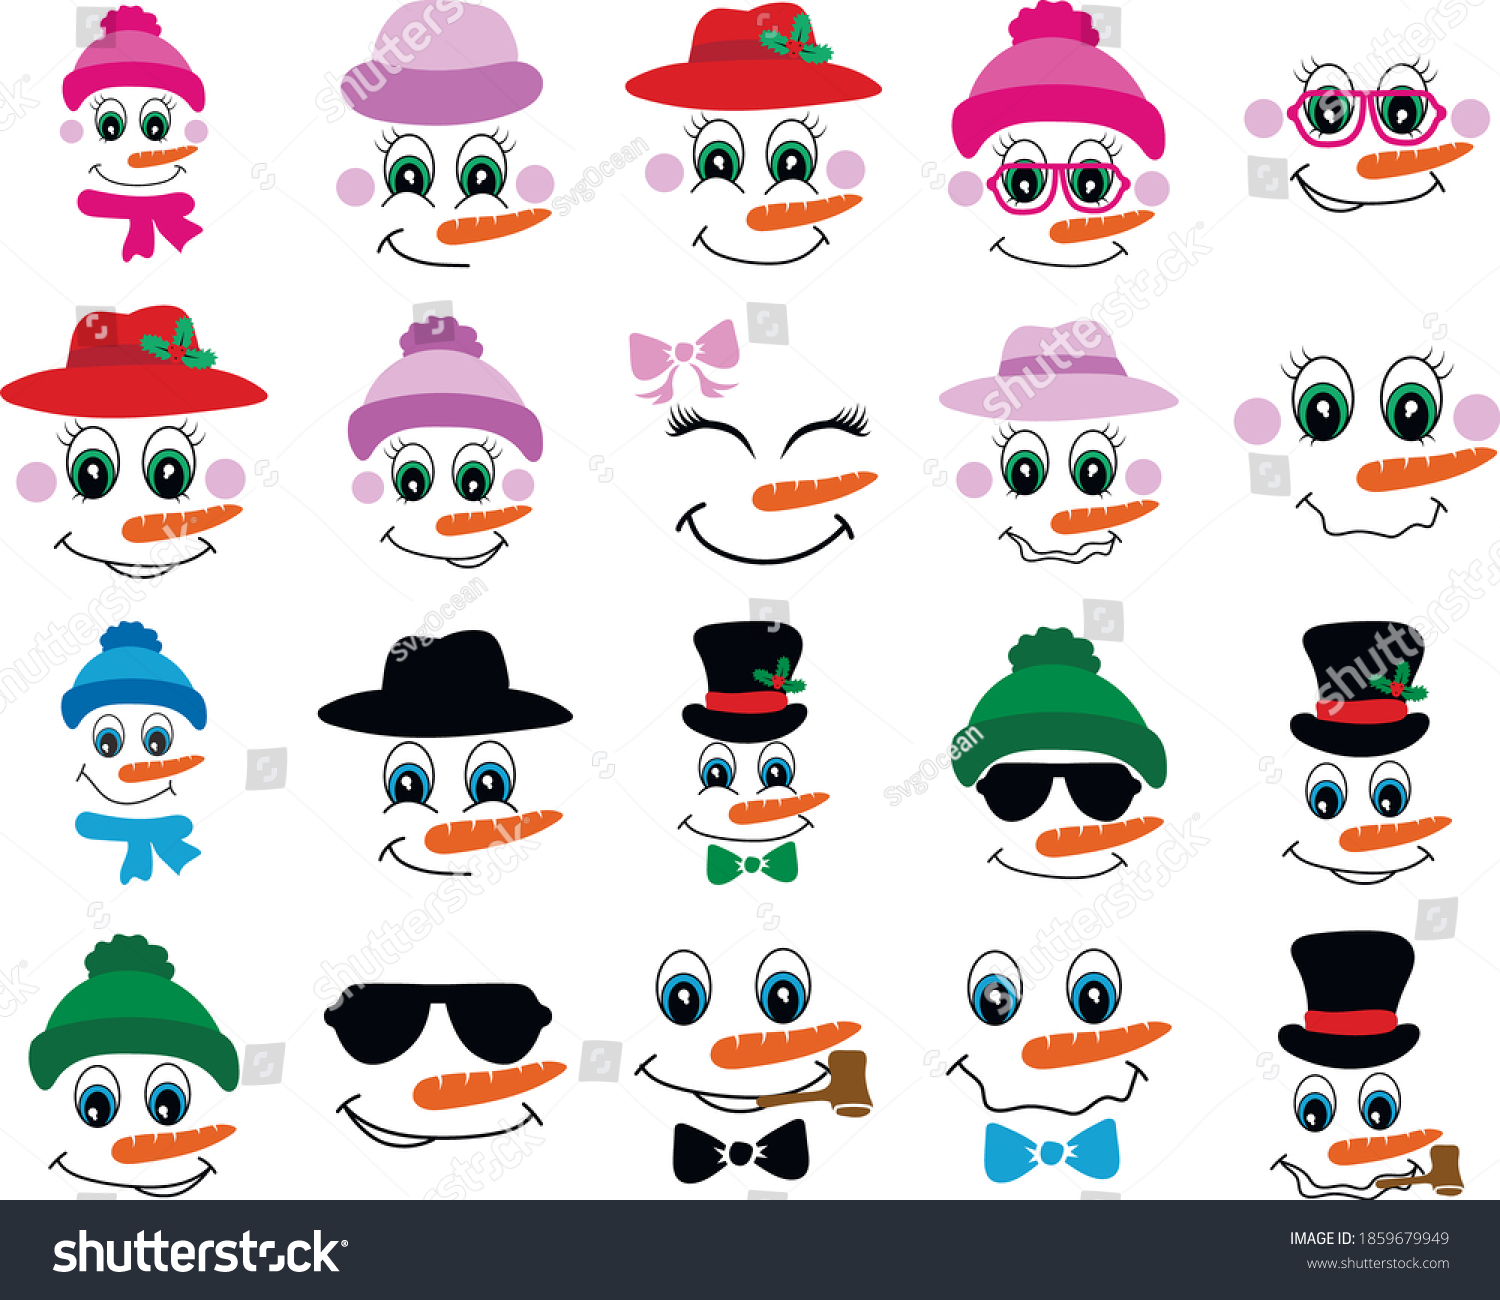 SVG of Vector Collection of Cute Snowman and Snowman girl Faces. Big eyes, carrot nose svg